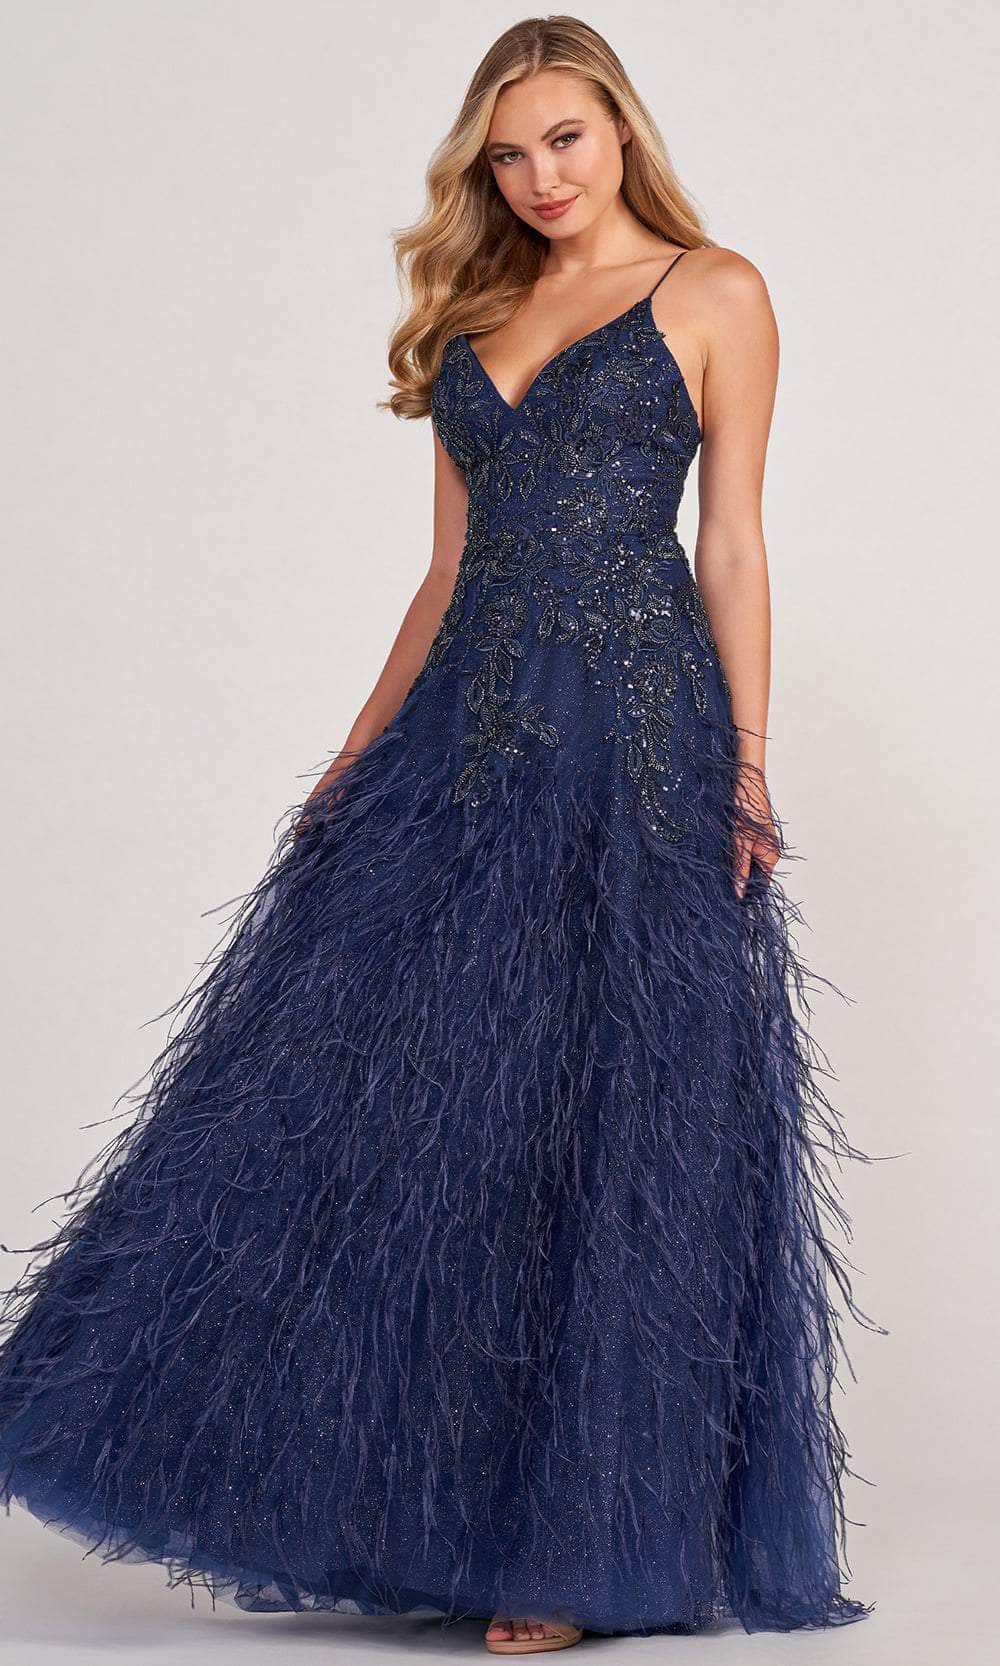 Colette for Mon Cheri CL2044 - Sleeveless Feathered Evening Dress Evening Dresses 00 / Navy